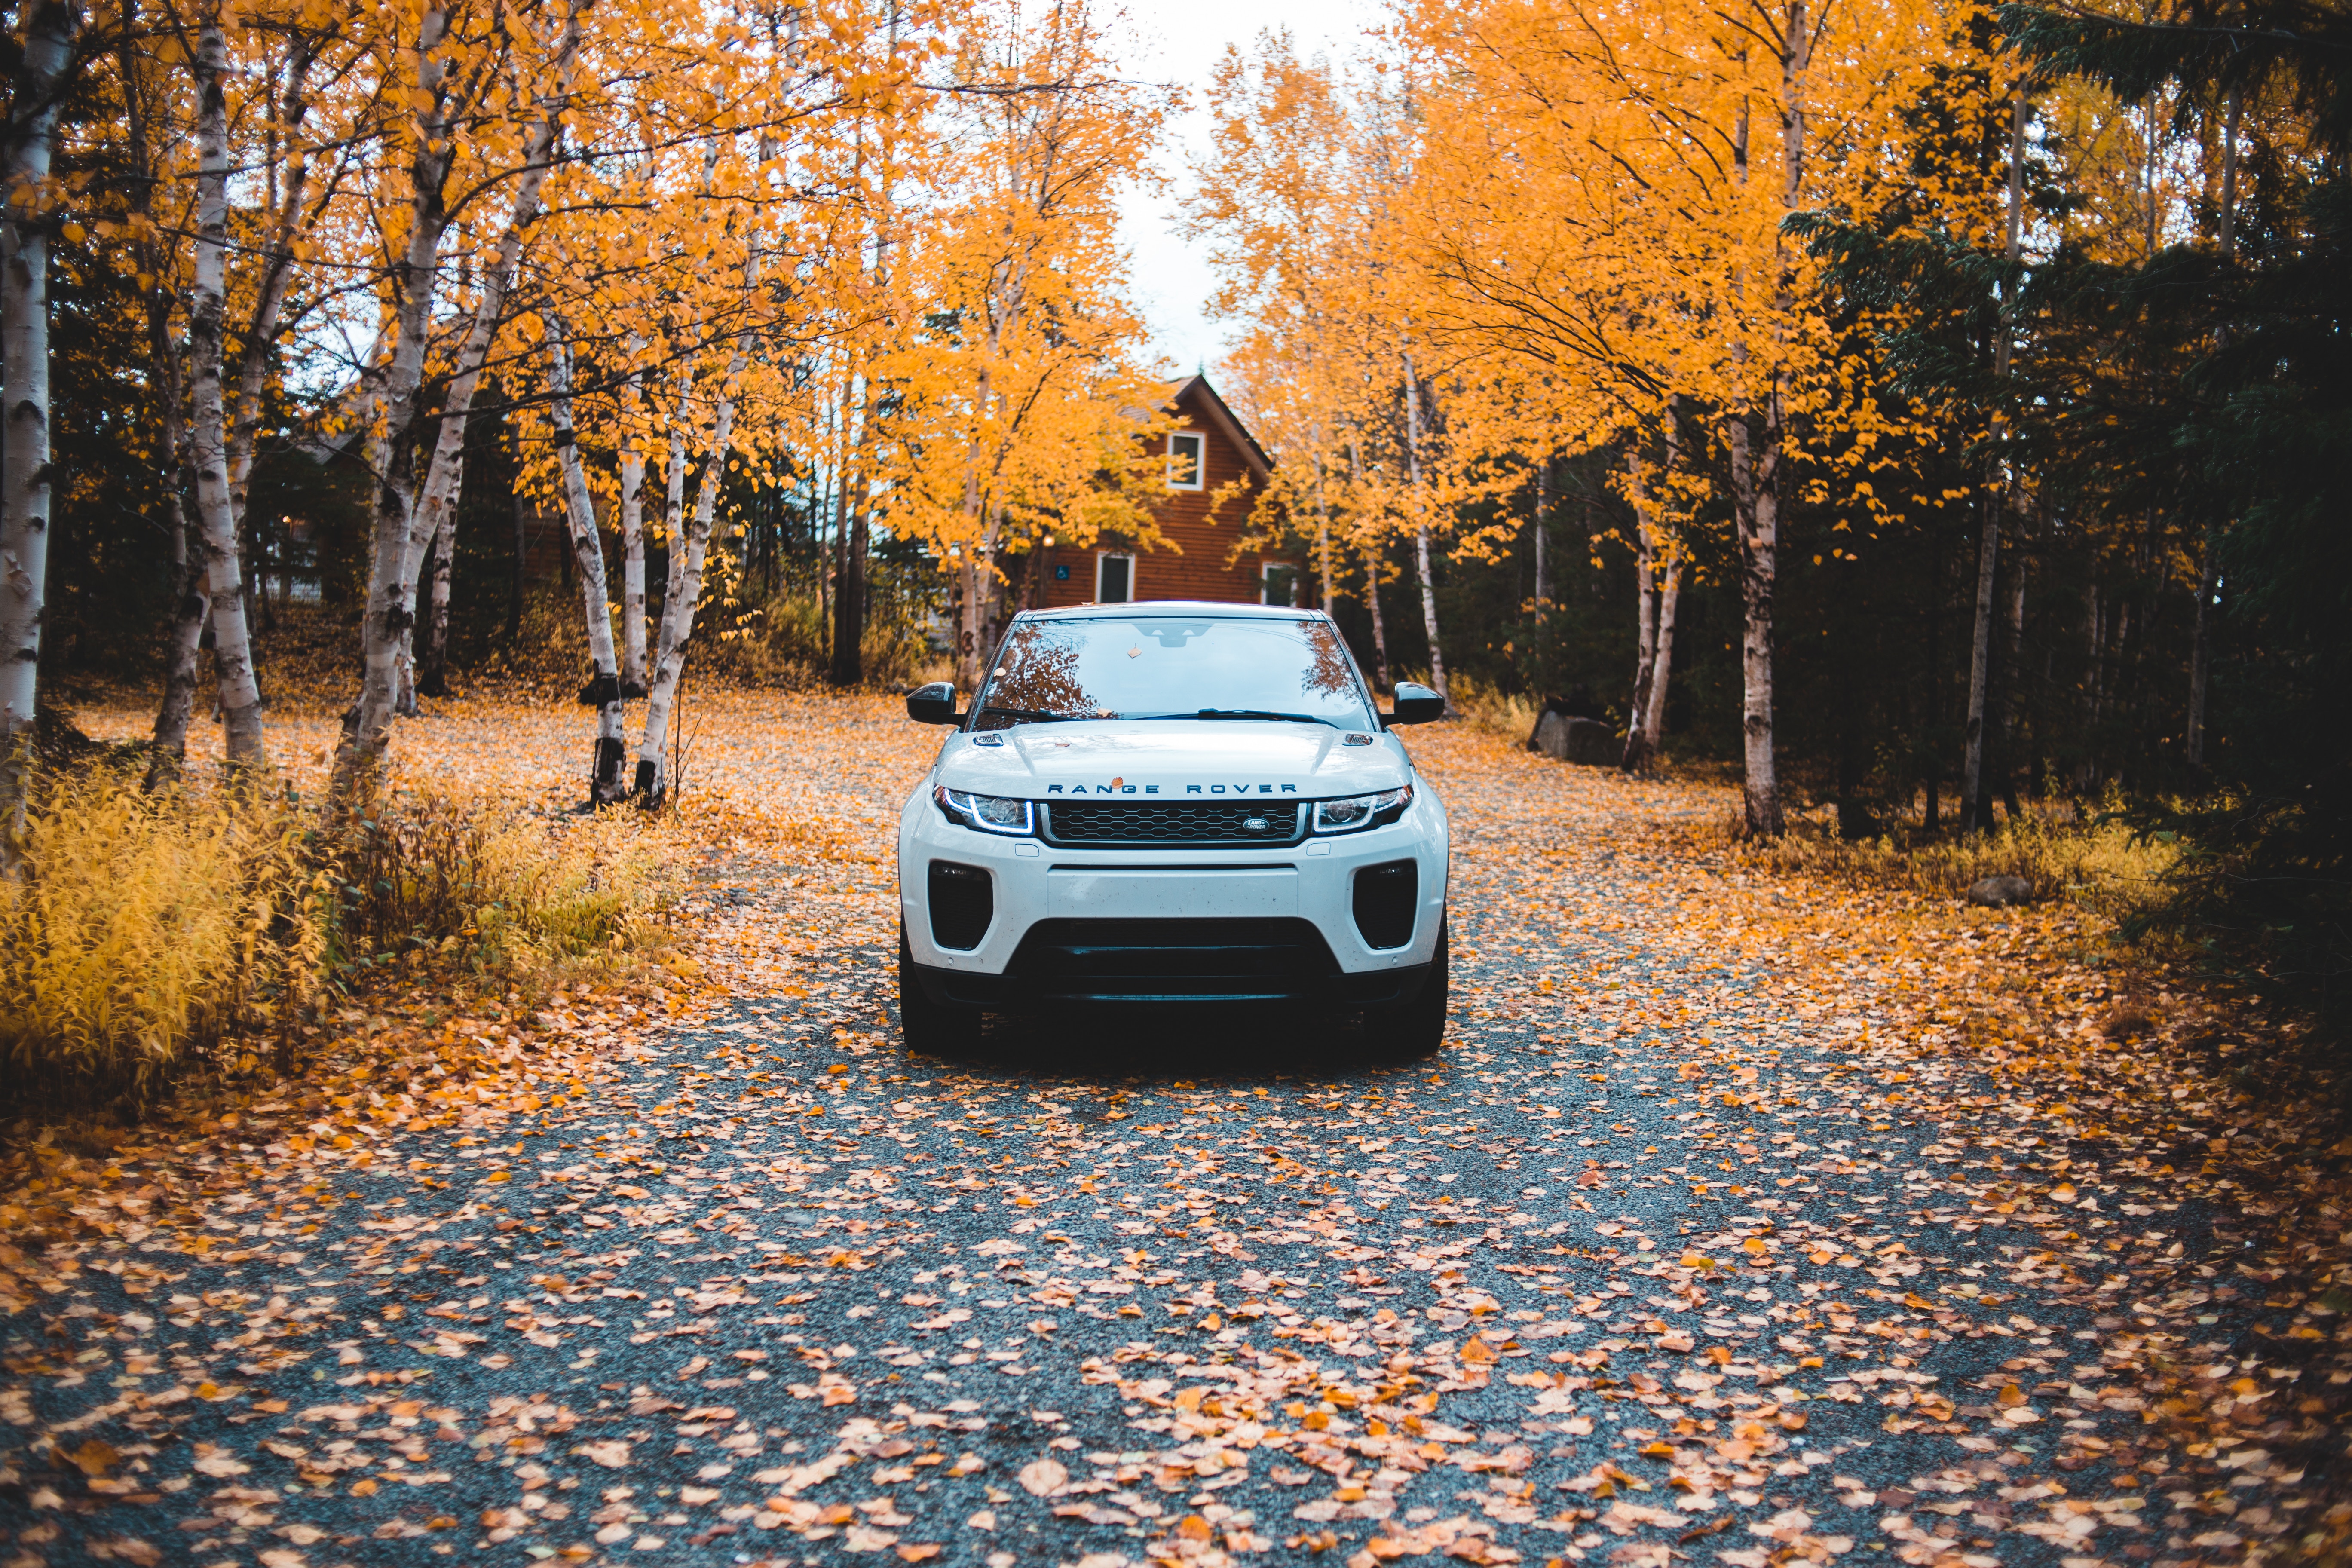 Mobile HD Wallpaper Range Rover suv, land rover, front view, cars